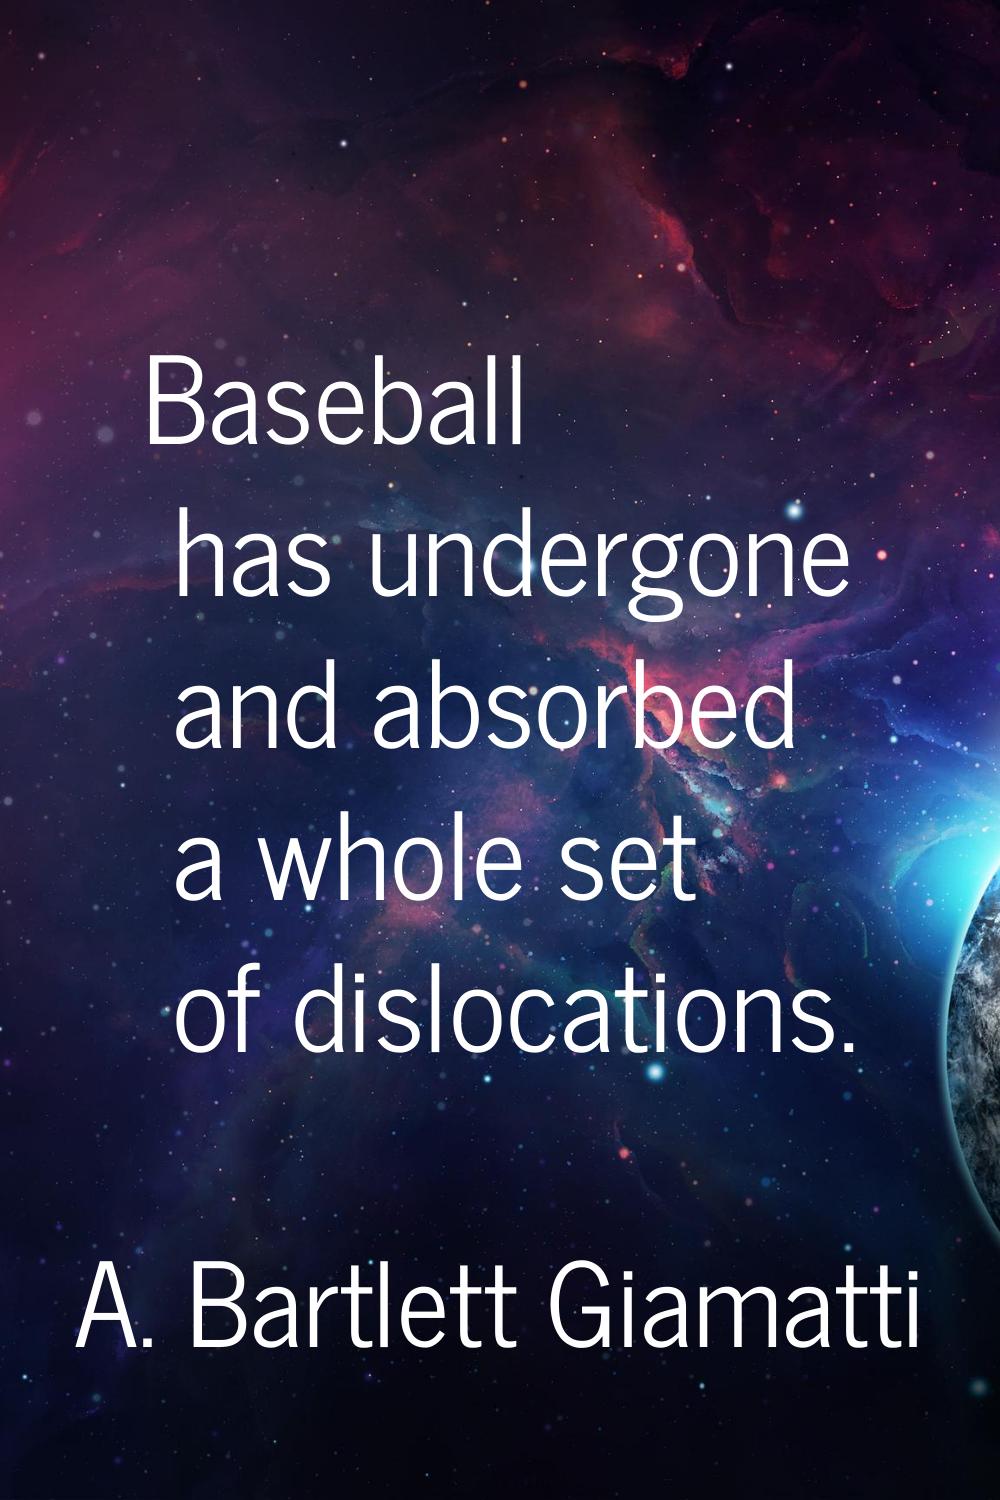 Baseball has undergone and absorbed a whole set of dislocations.